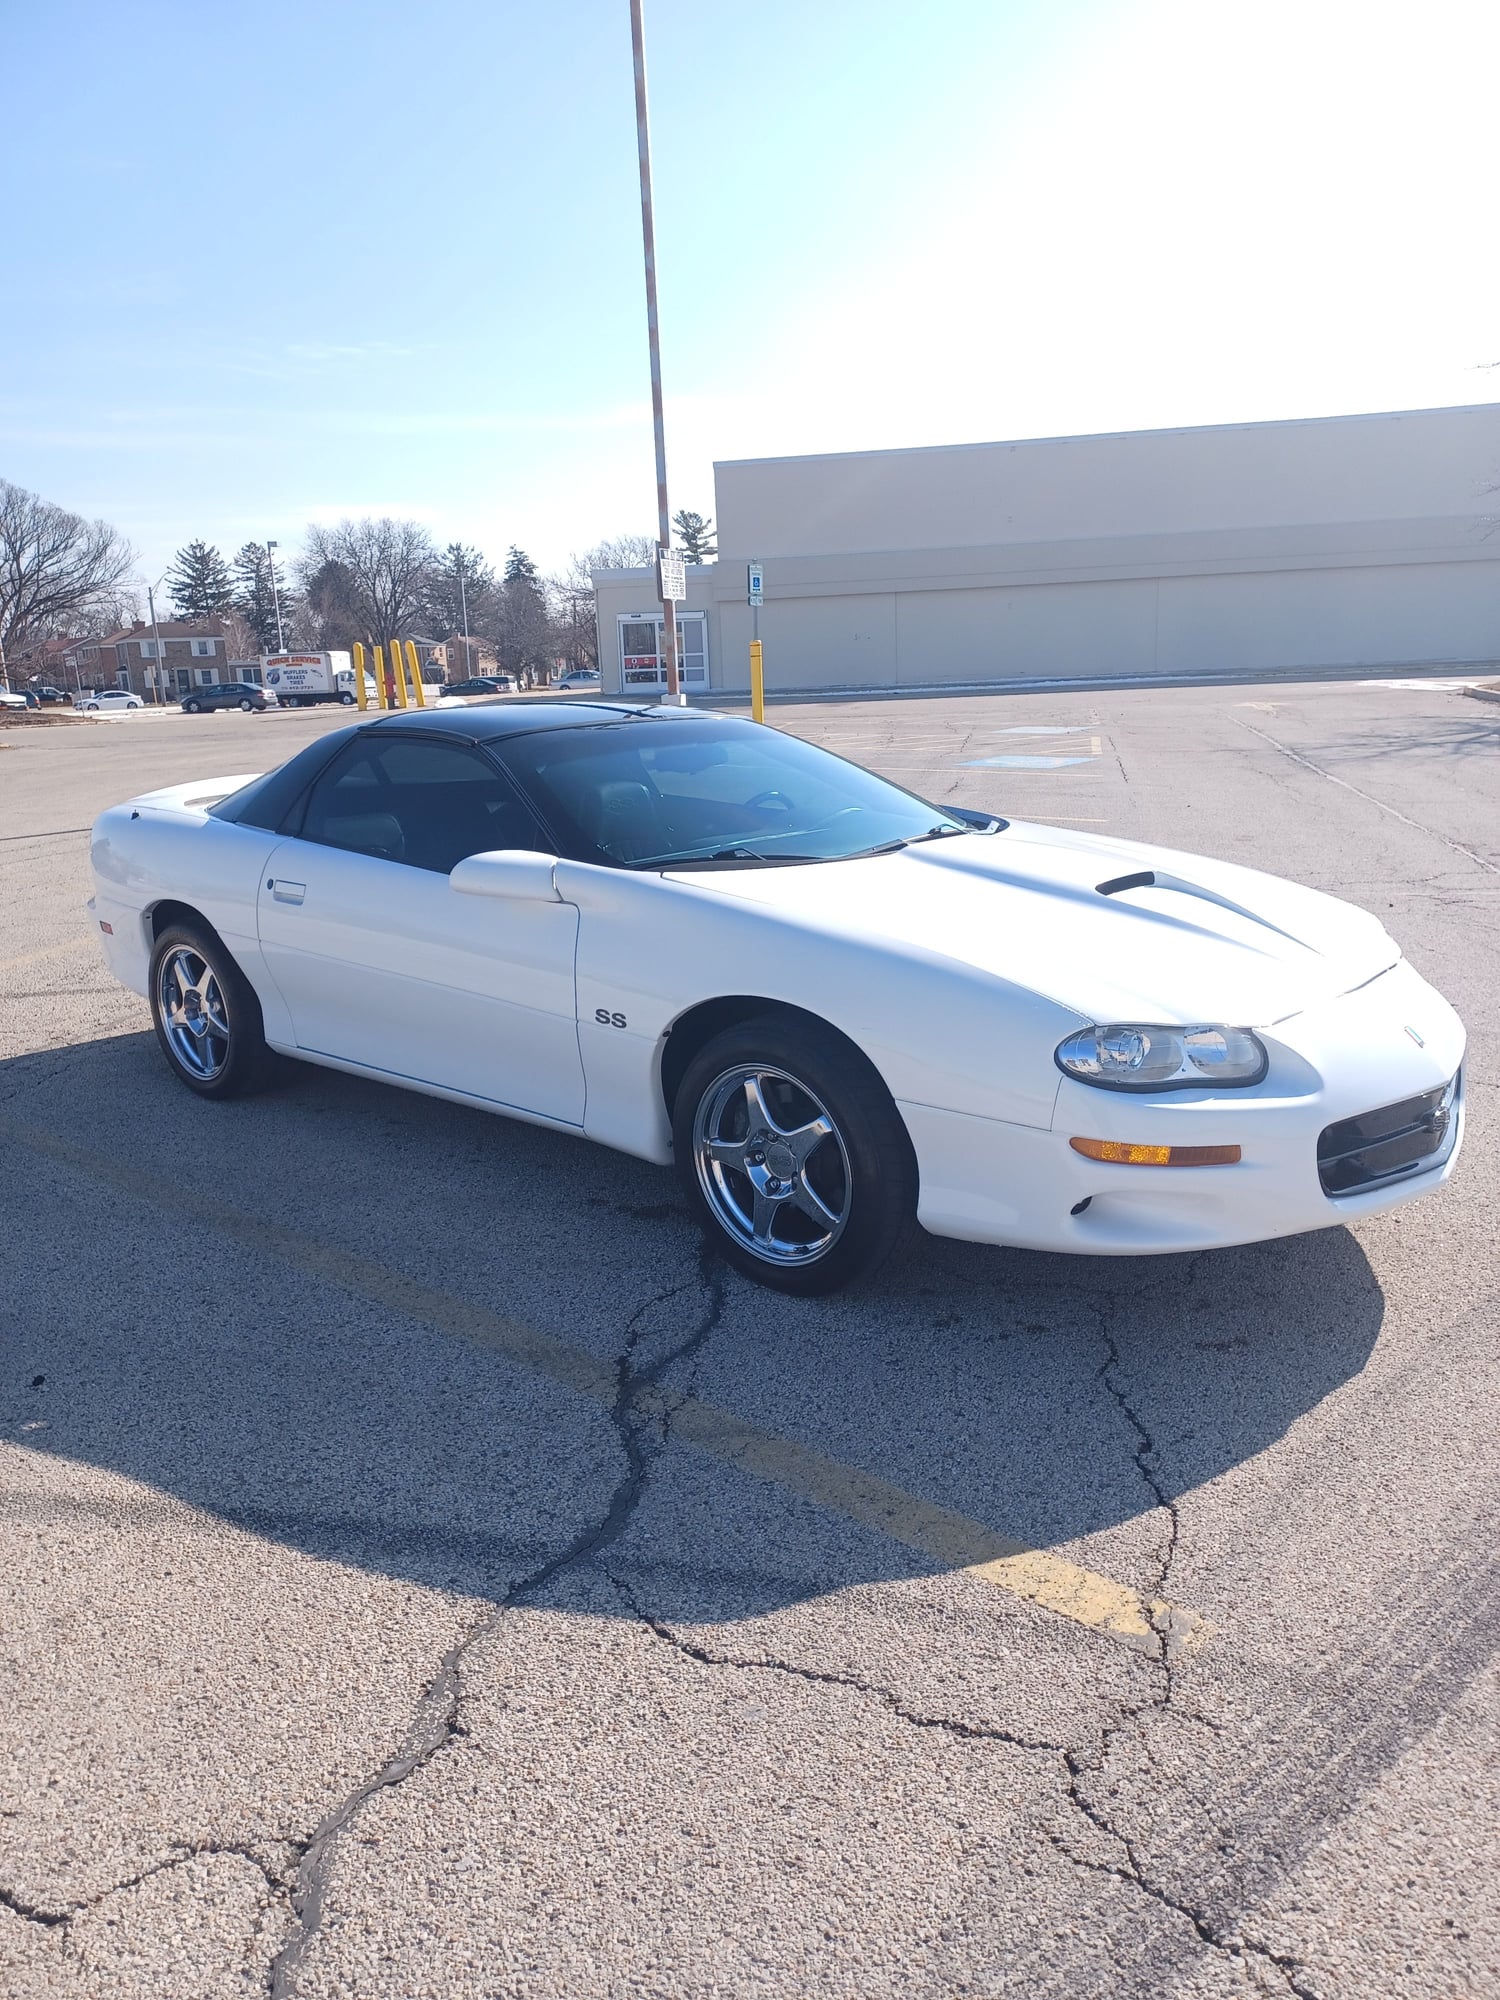 2000 Chevrolet Camaro - 2000 Camaro SS! BUILT! Fast, reliable, daily driveable! Heat and AC! Big Motor! - Used - Chicago, IL 60018, United States